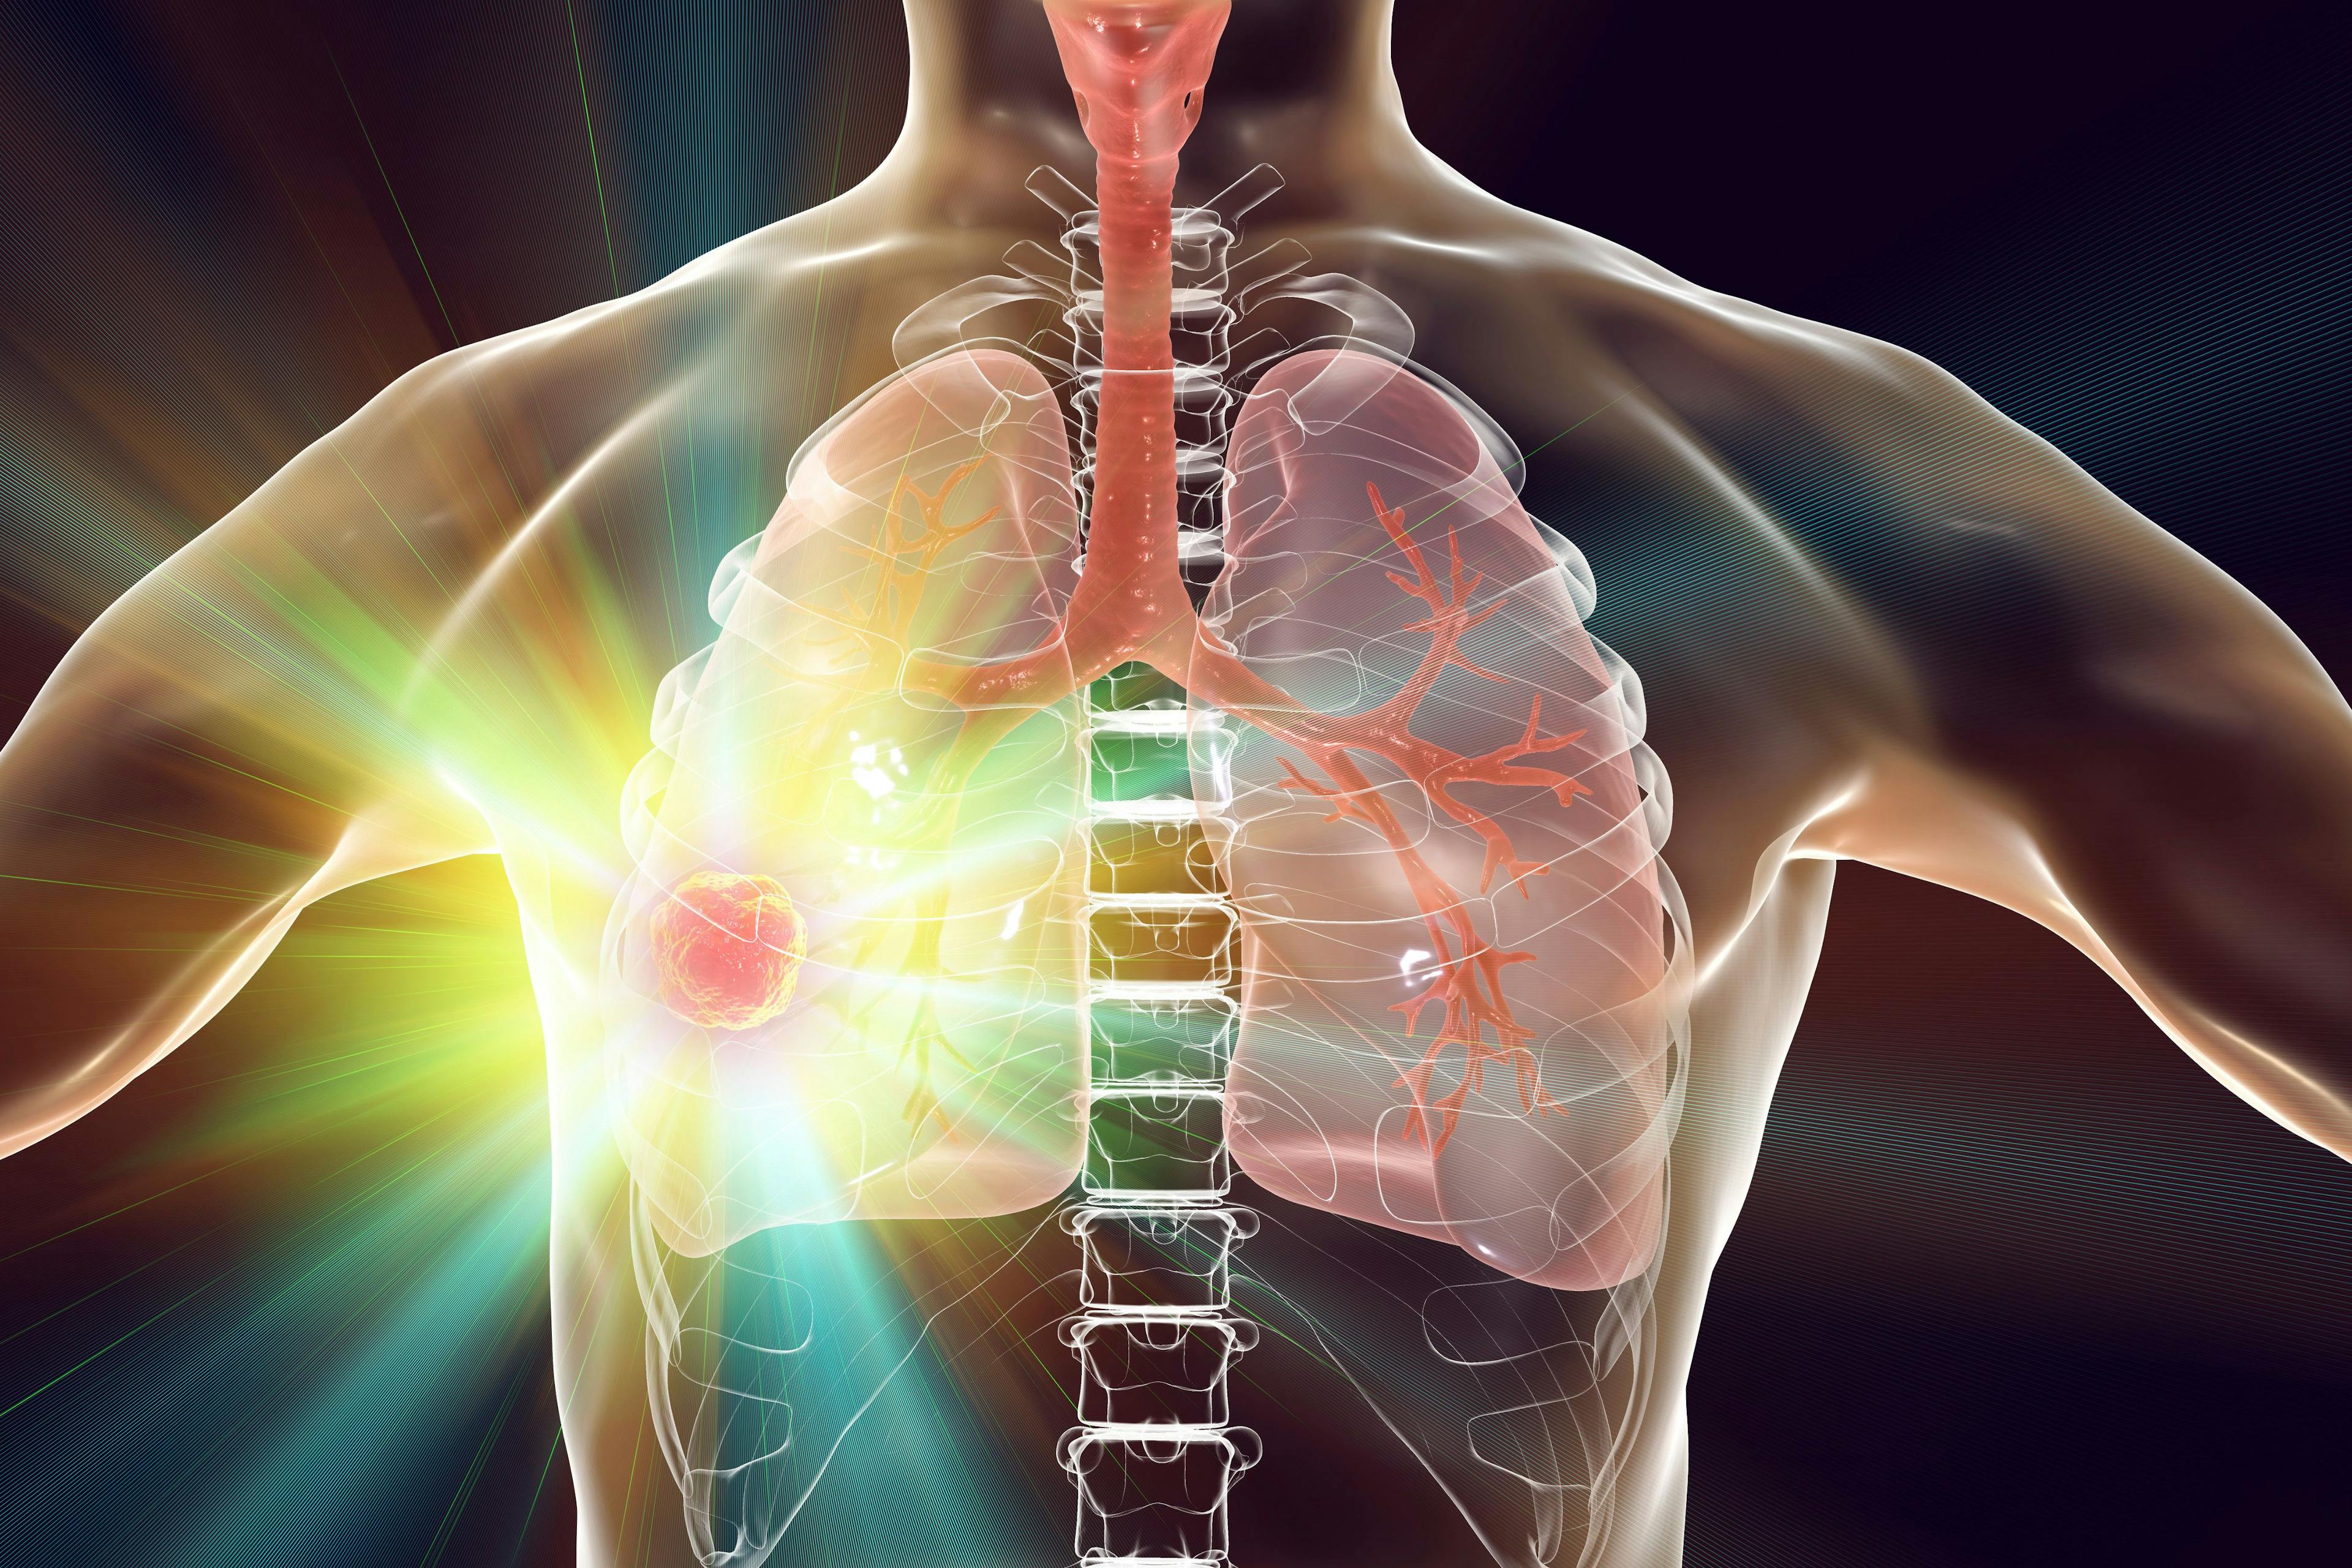 Lung cancer treatment and prevention concept | Image credit: Dr_Microbe - stock.adobe.com